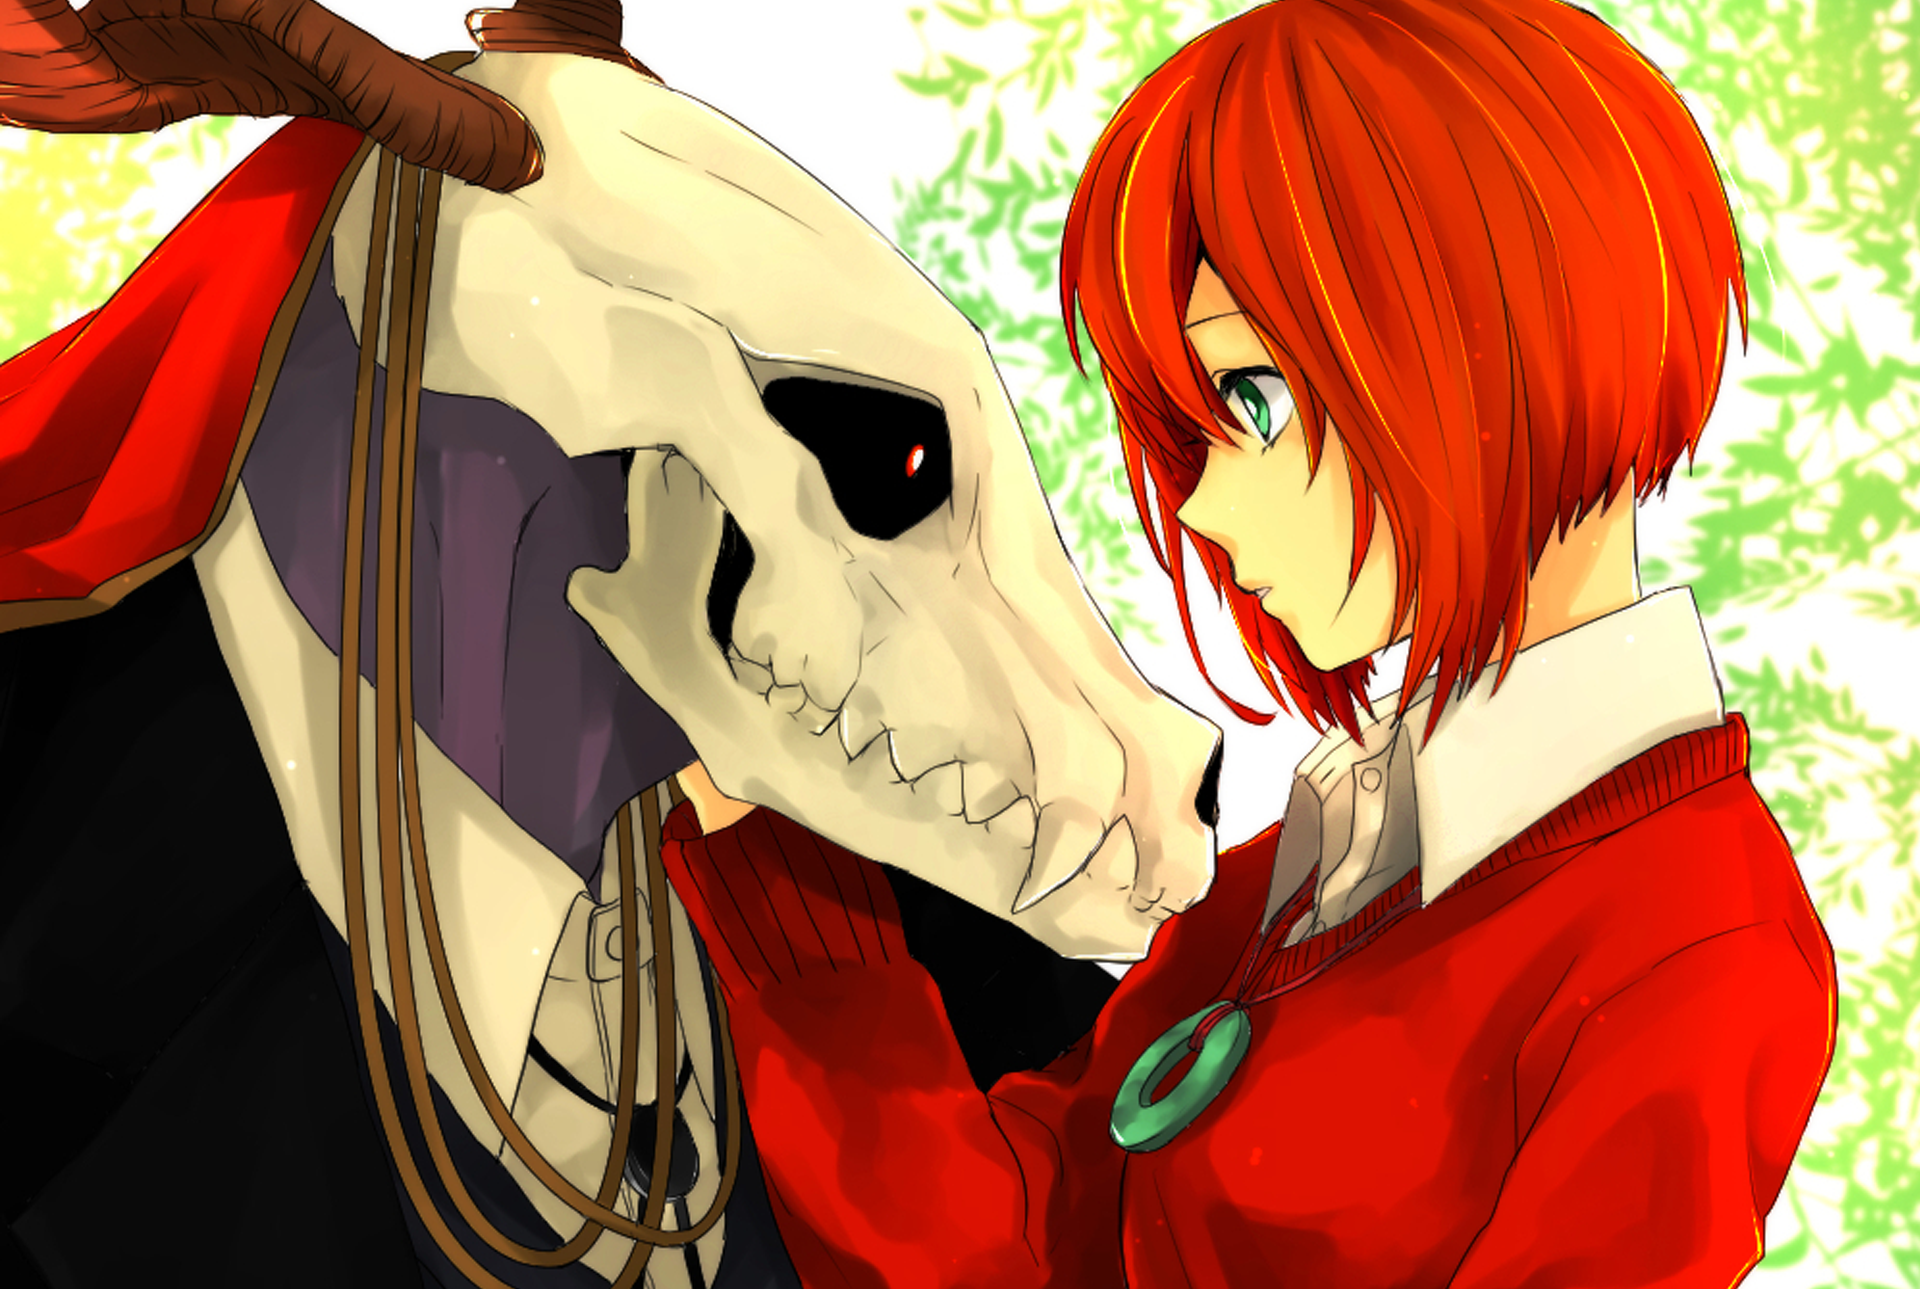 The Ancient Magus' Bride HD Wallpaper